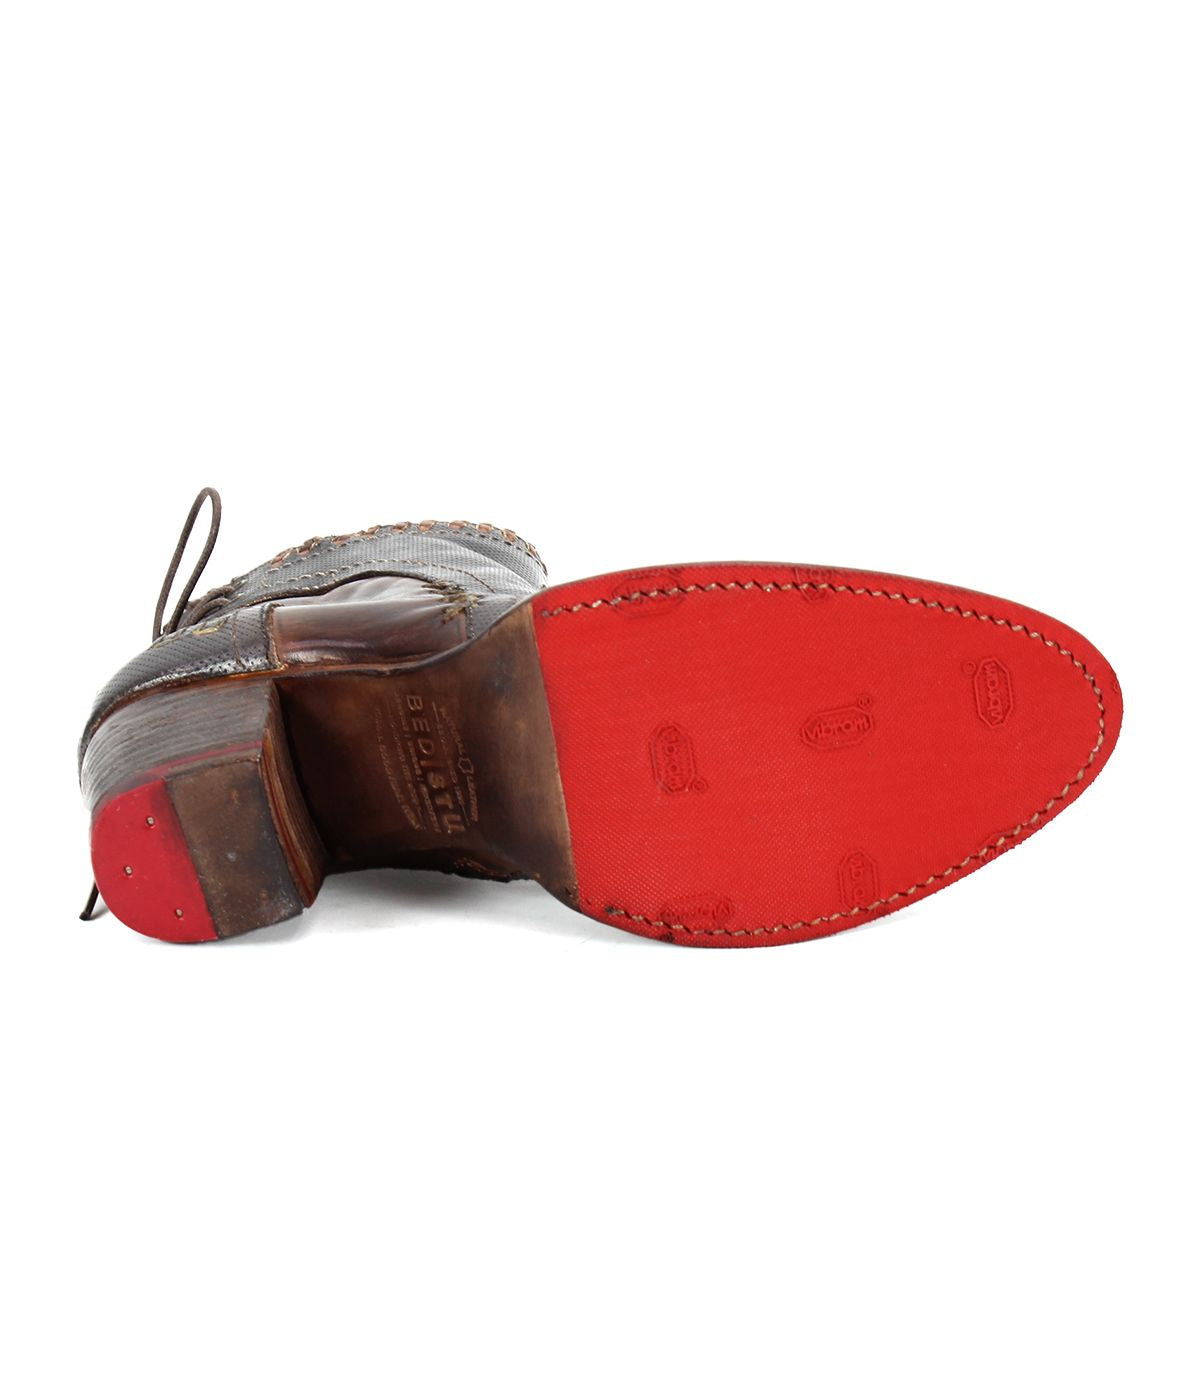 The image shows the bottom view of the Bia, a comfortable leather bootie from Bed Stu, featuring a red sole and visible stitching. The shoe boasts a dark brown upper part and a leather heel with the brand's logo prominently displayed on the sole, emphasizing its handcrafted quality.